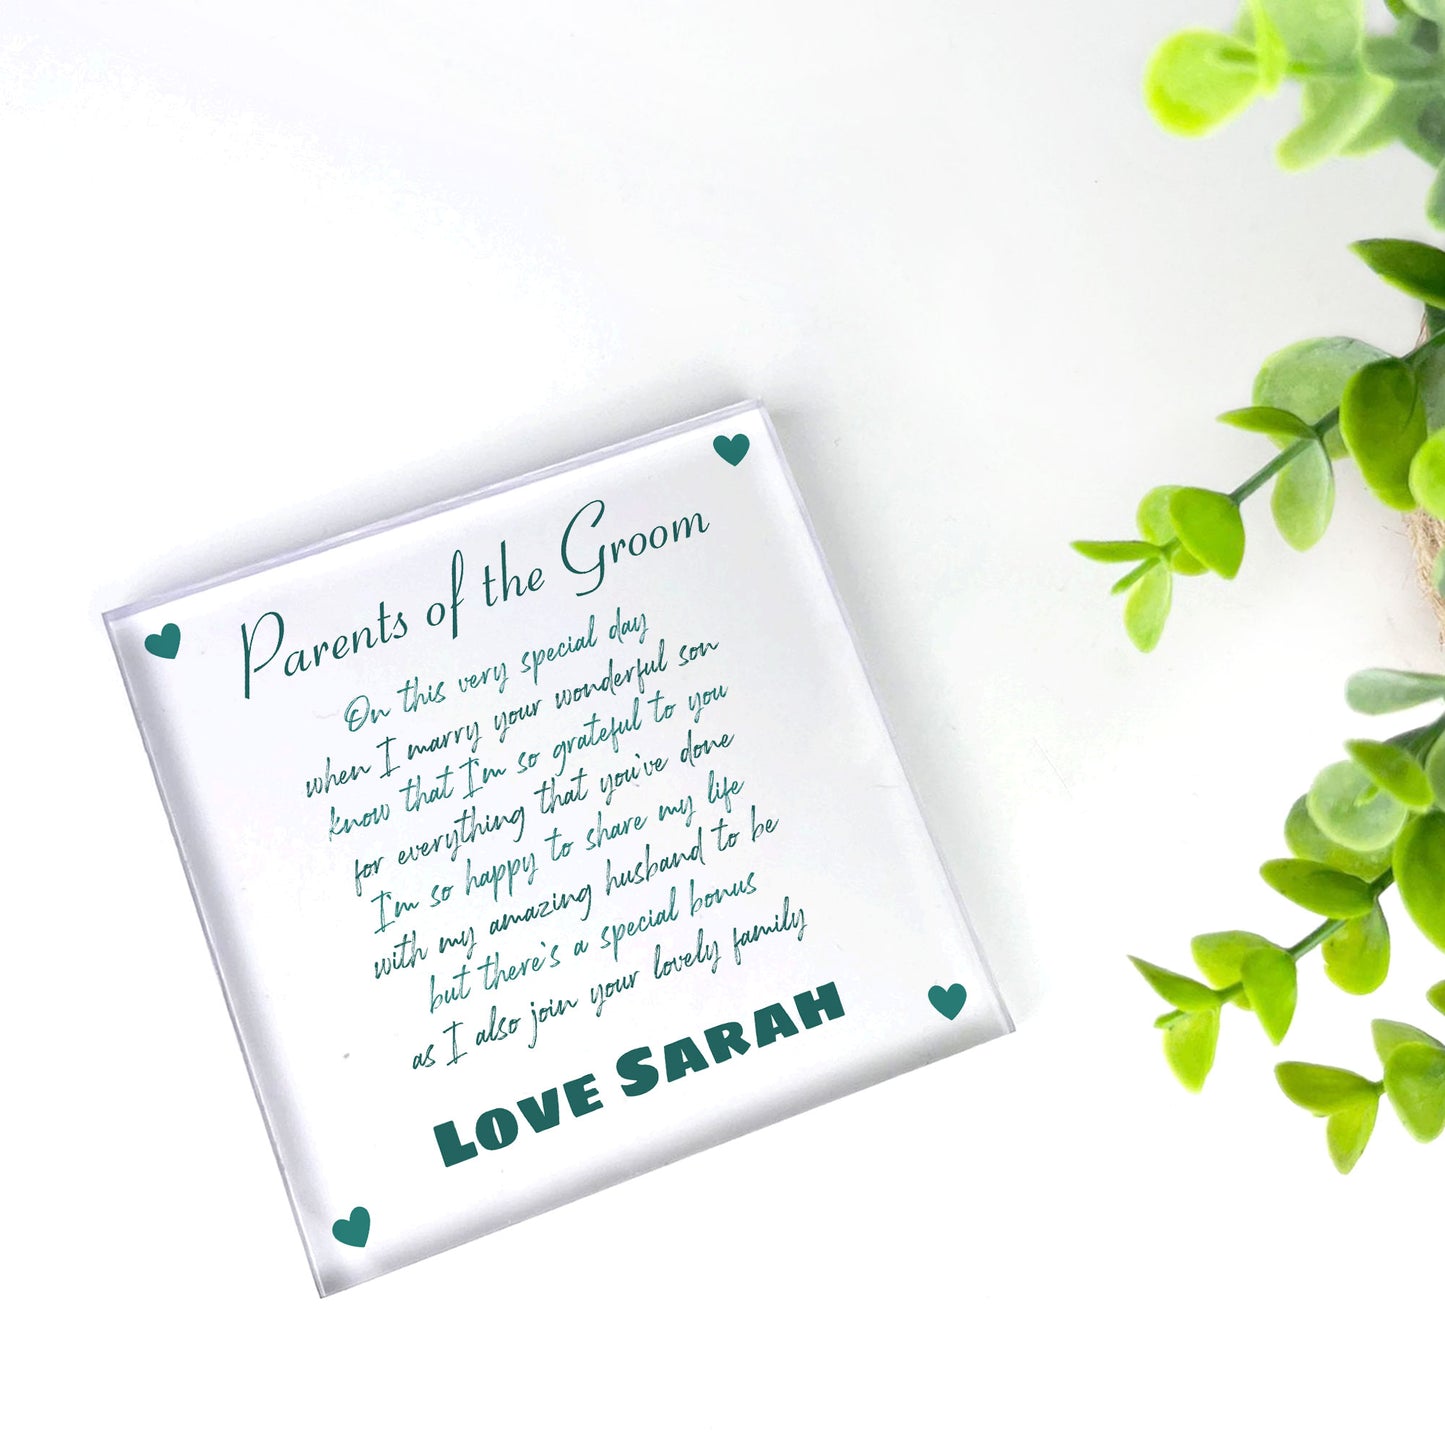 Personalised Gift For Parents Of Groom Mother Father Of Groom